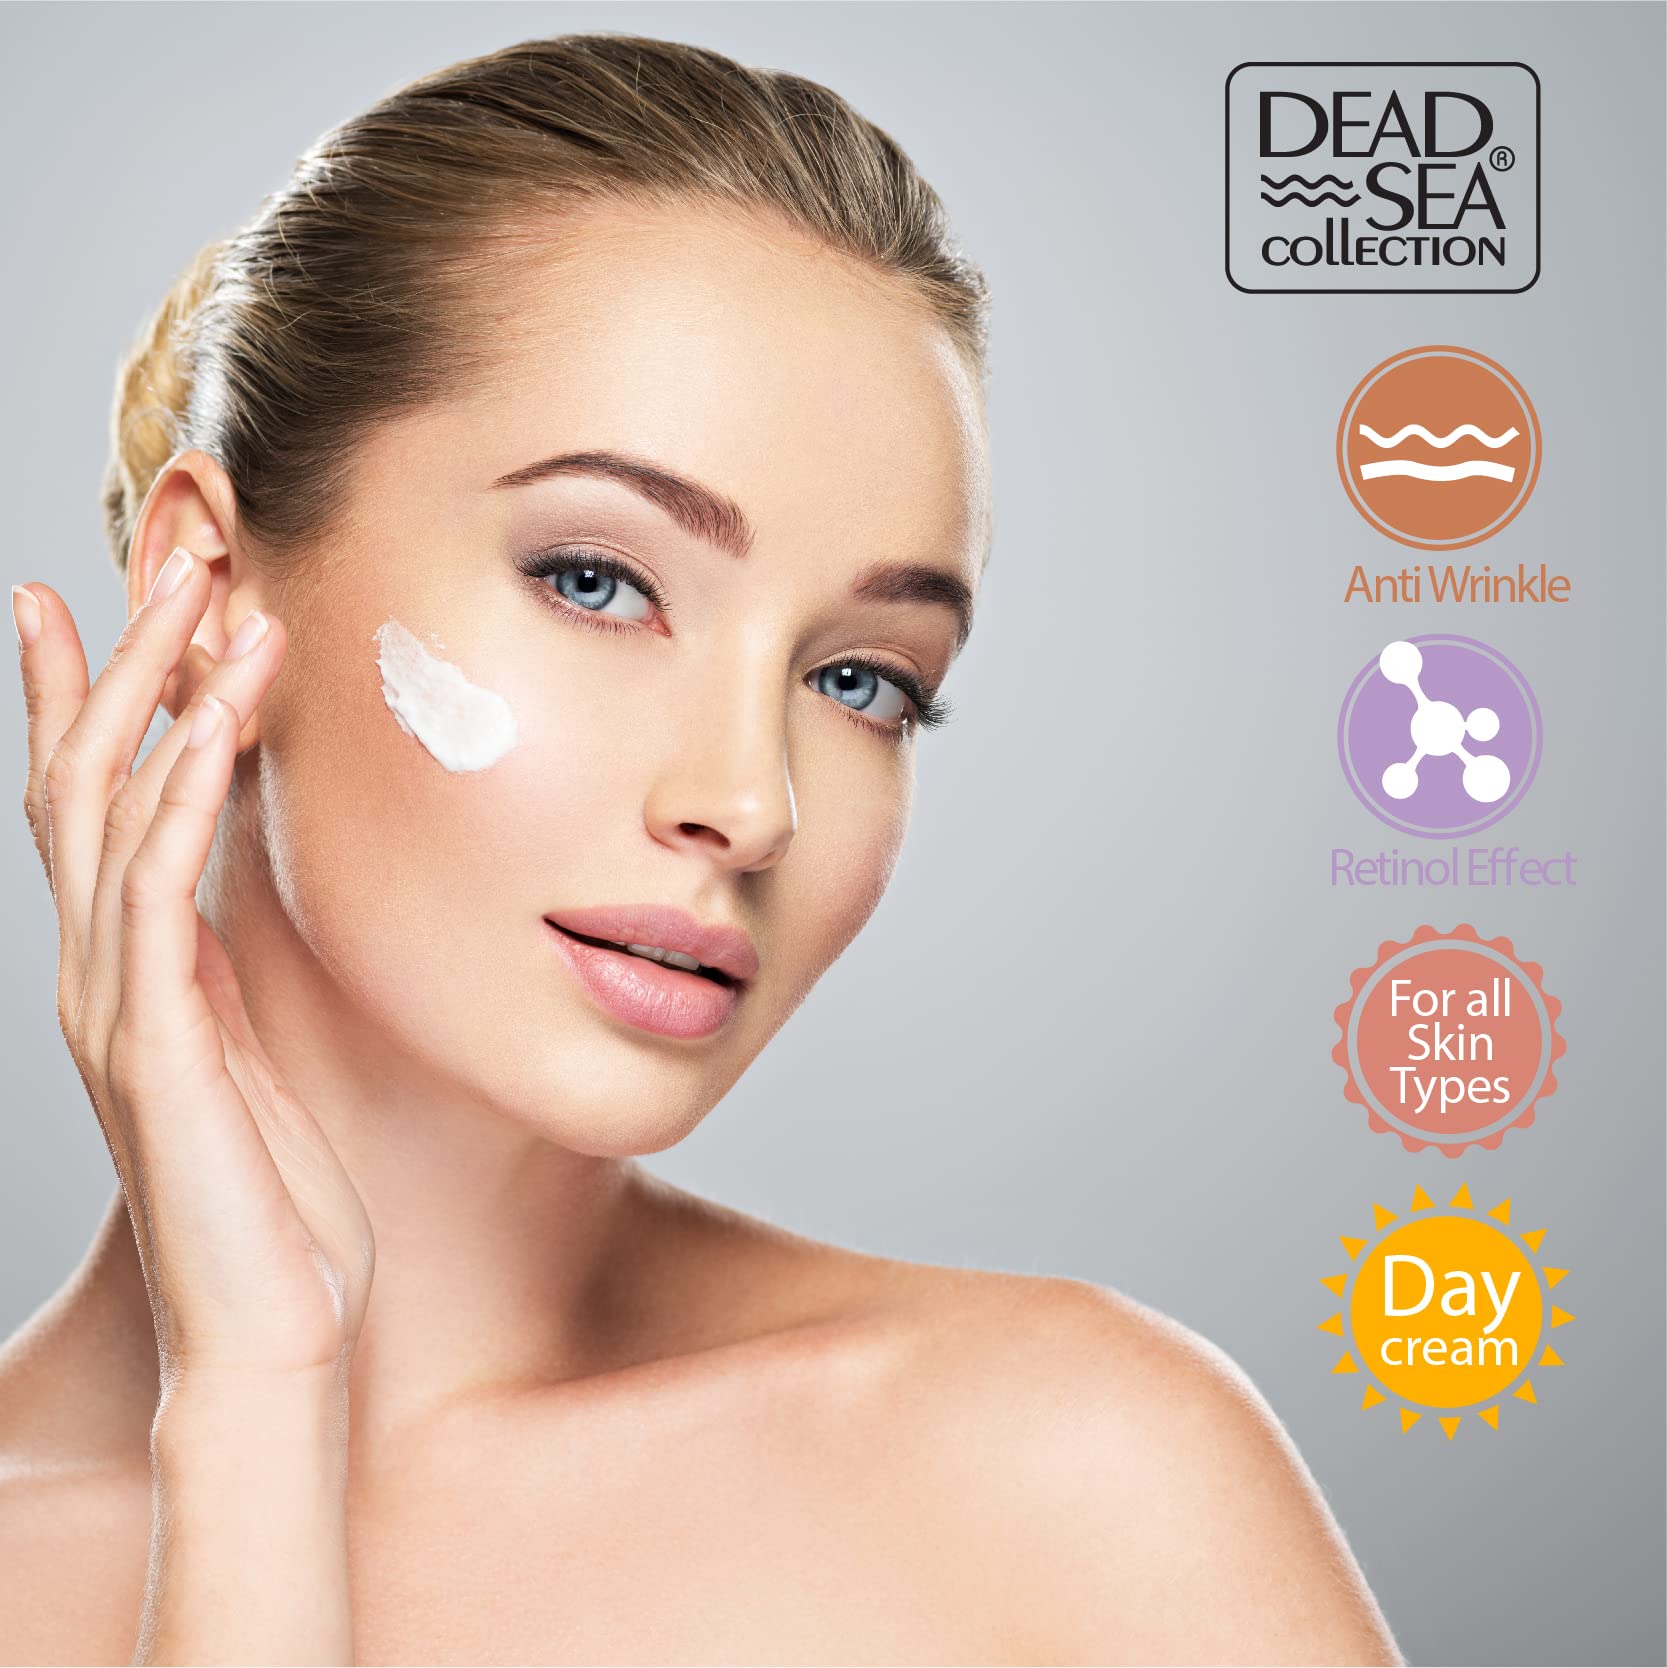 Retinol Dead Sea Collection Anti-Wrinkle Day Cream for Face with Retinol and Sea Minerals - Anti Aging, Nourishing and Moisturizer Face 